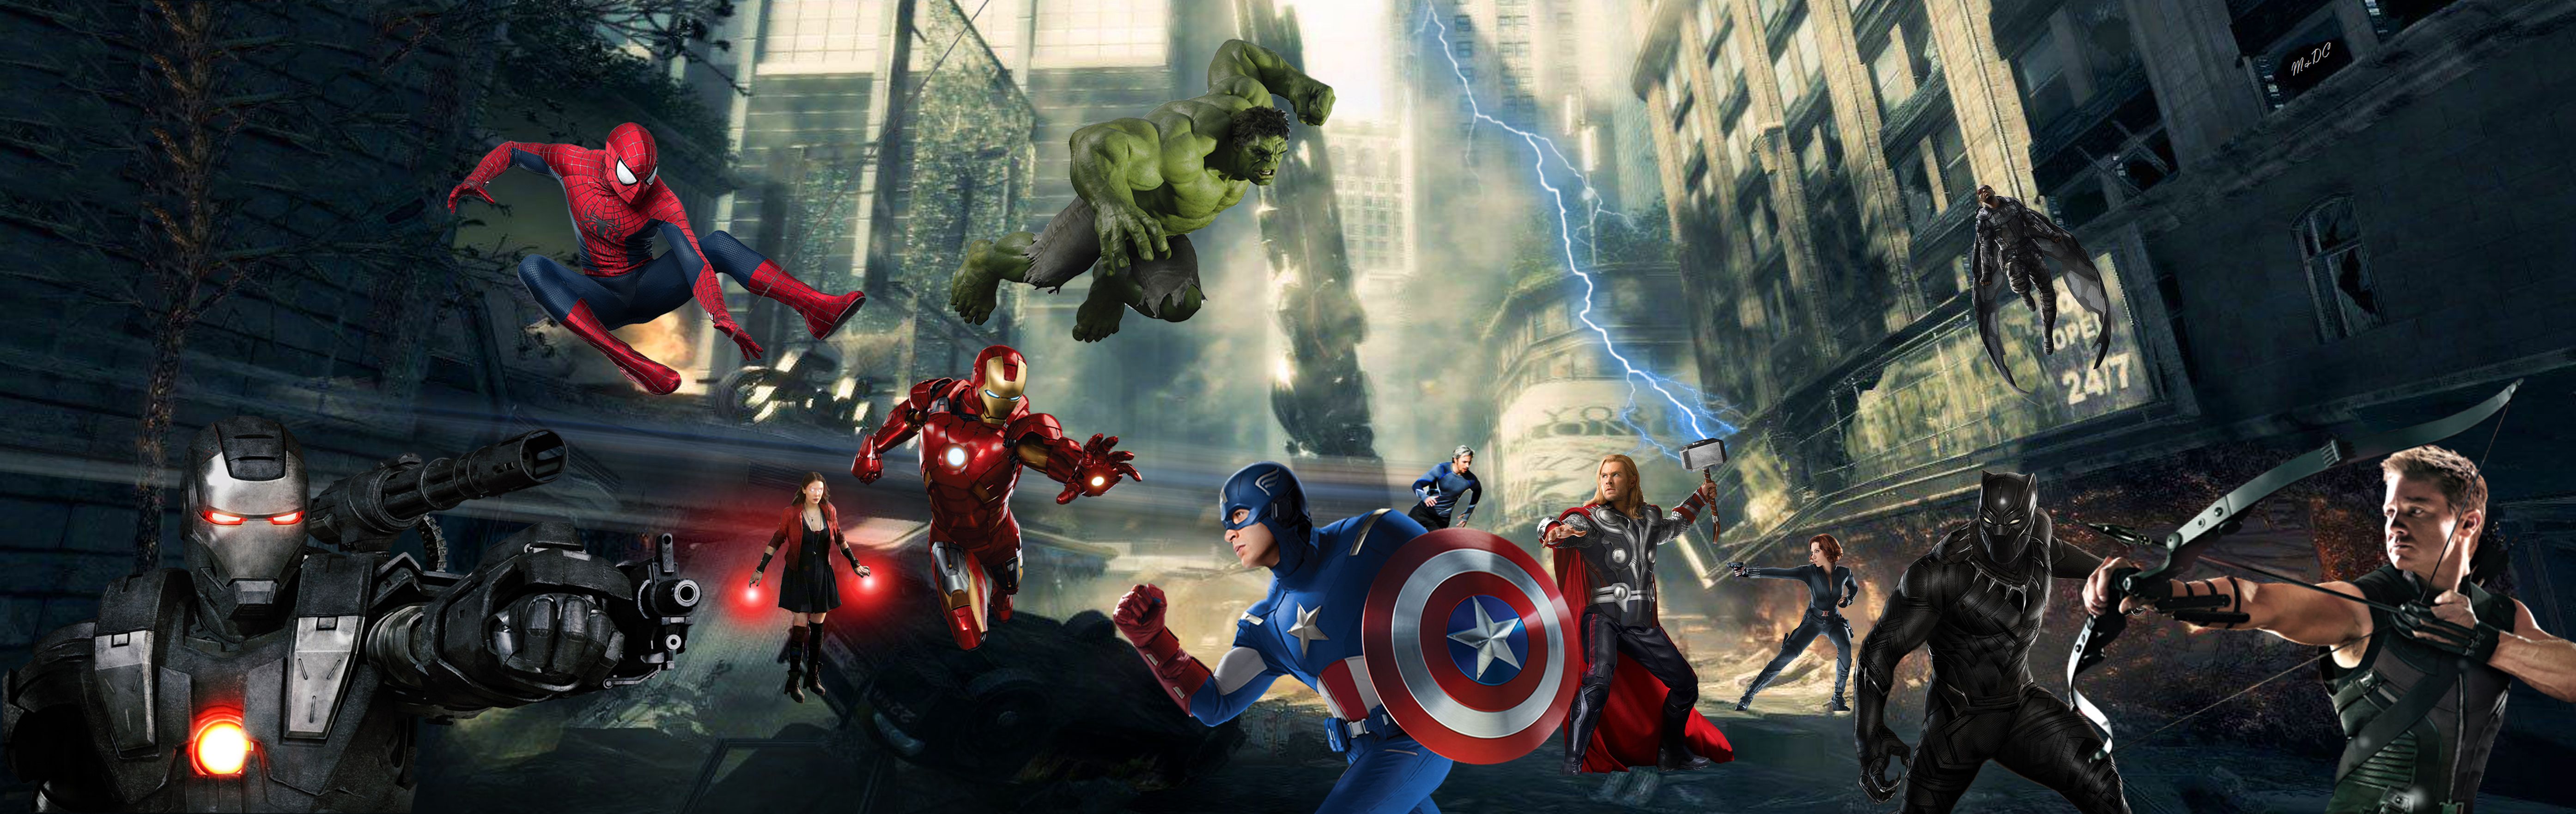 Avengers Assemble Artwork 4k, HD Superheroes, 4k Wallpaper, Image, Background, Photo and Picture